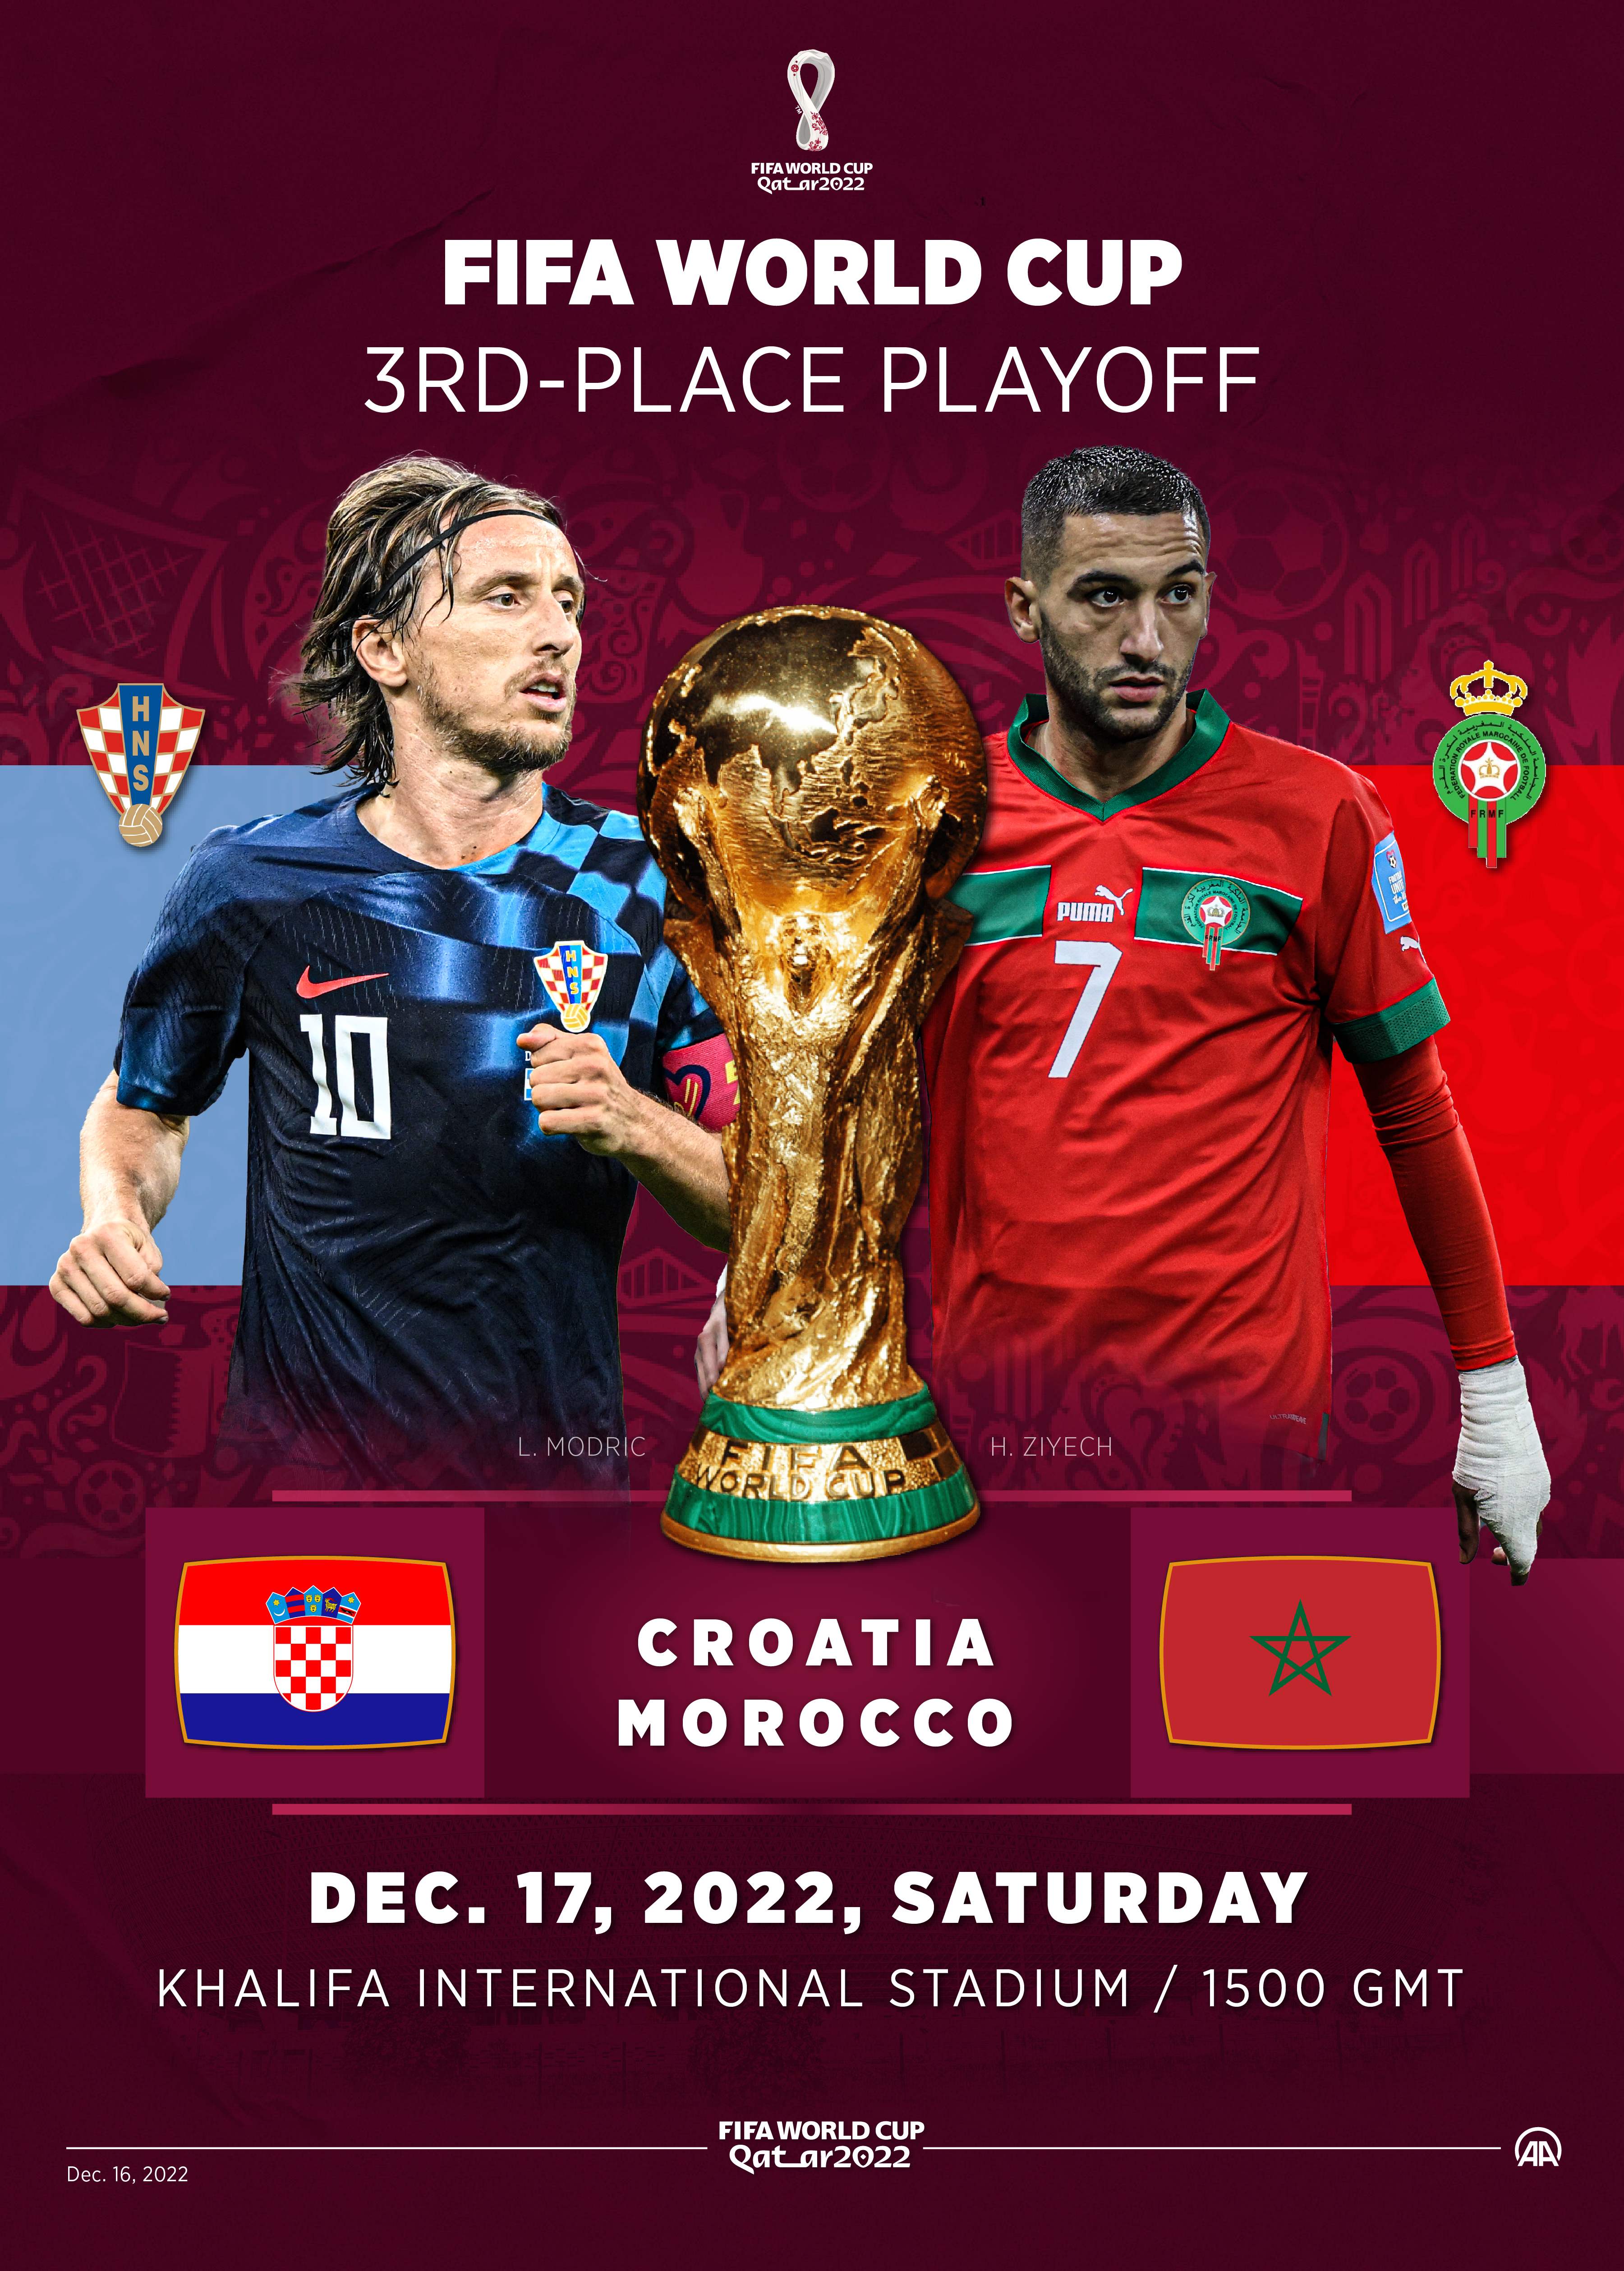 FIFA World Cup 3rd-place playoff